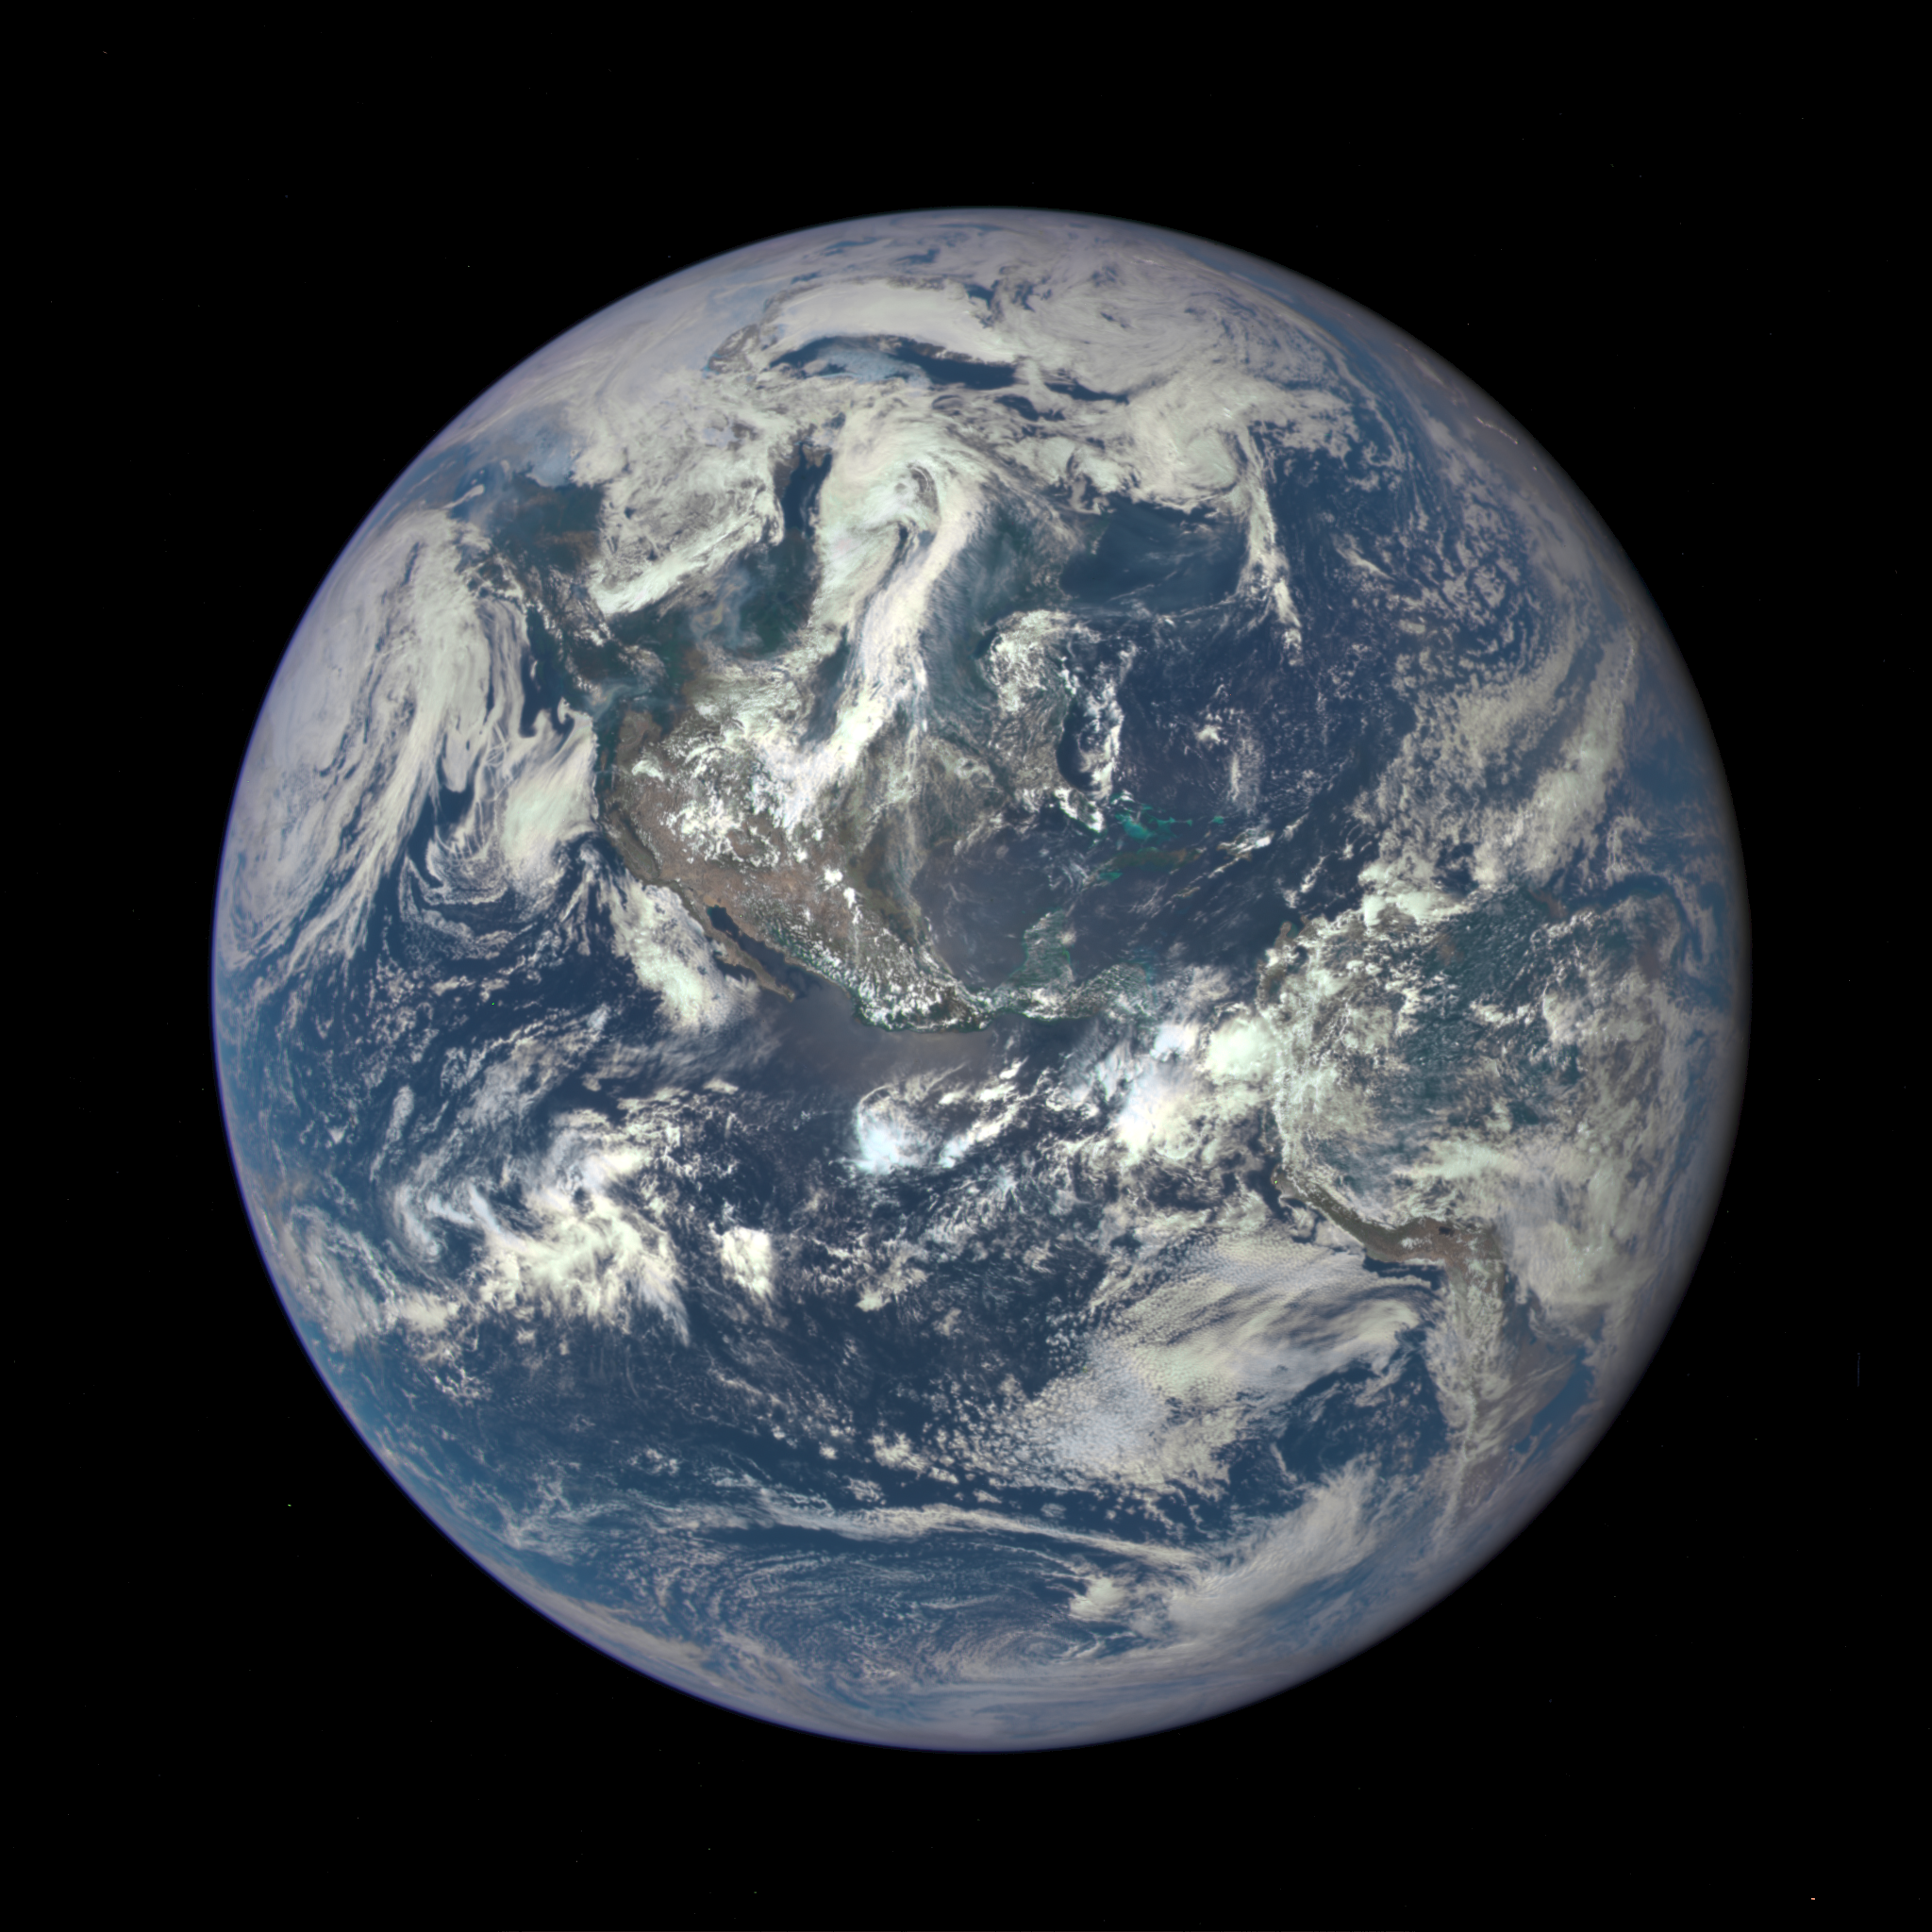 Earth as seen on July 6, 2015 from a distance of one million miles by a NASA scientific camera